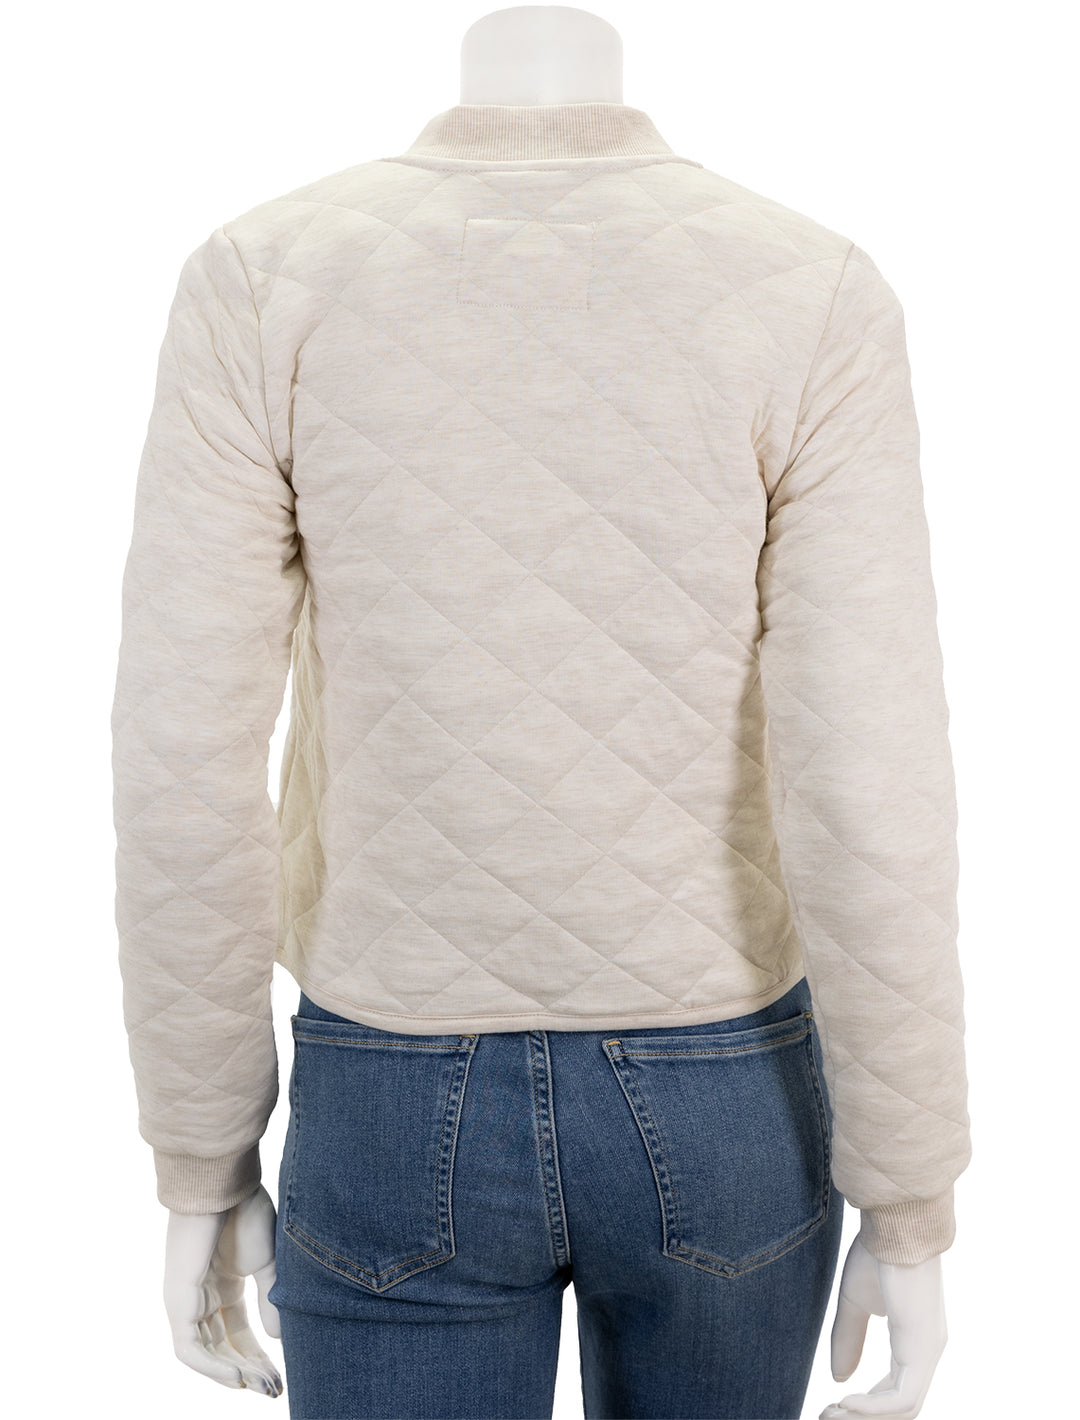 Back view of Marine Layer's updated corbet quilted bomber in antique white.